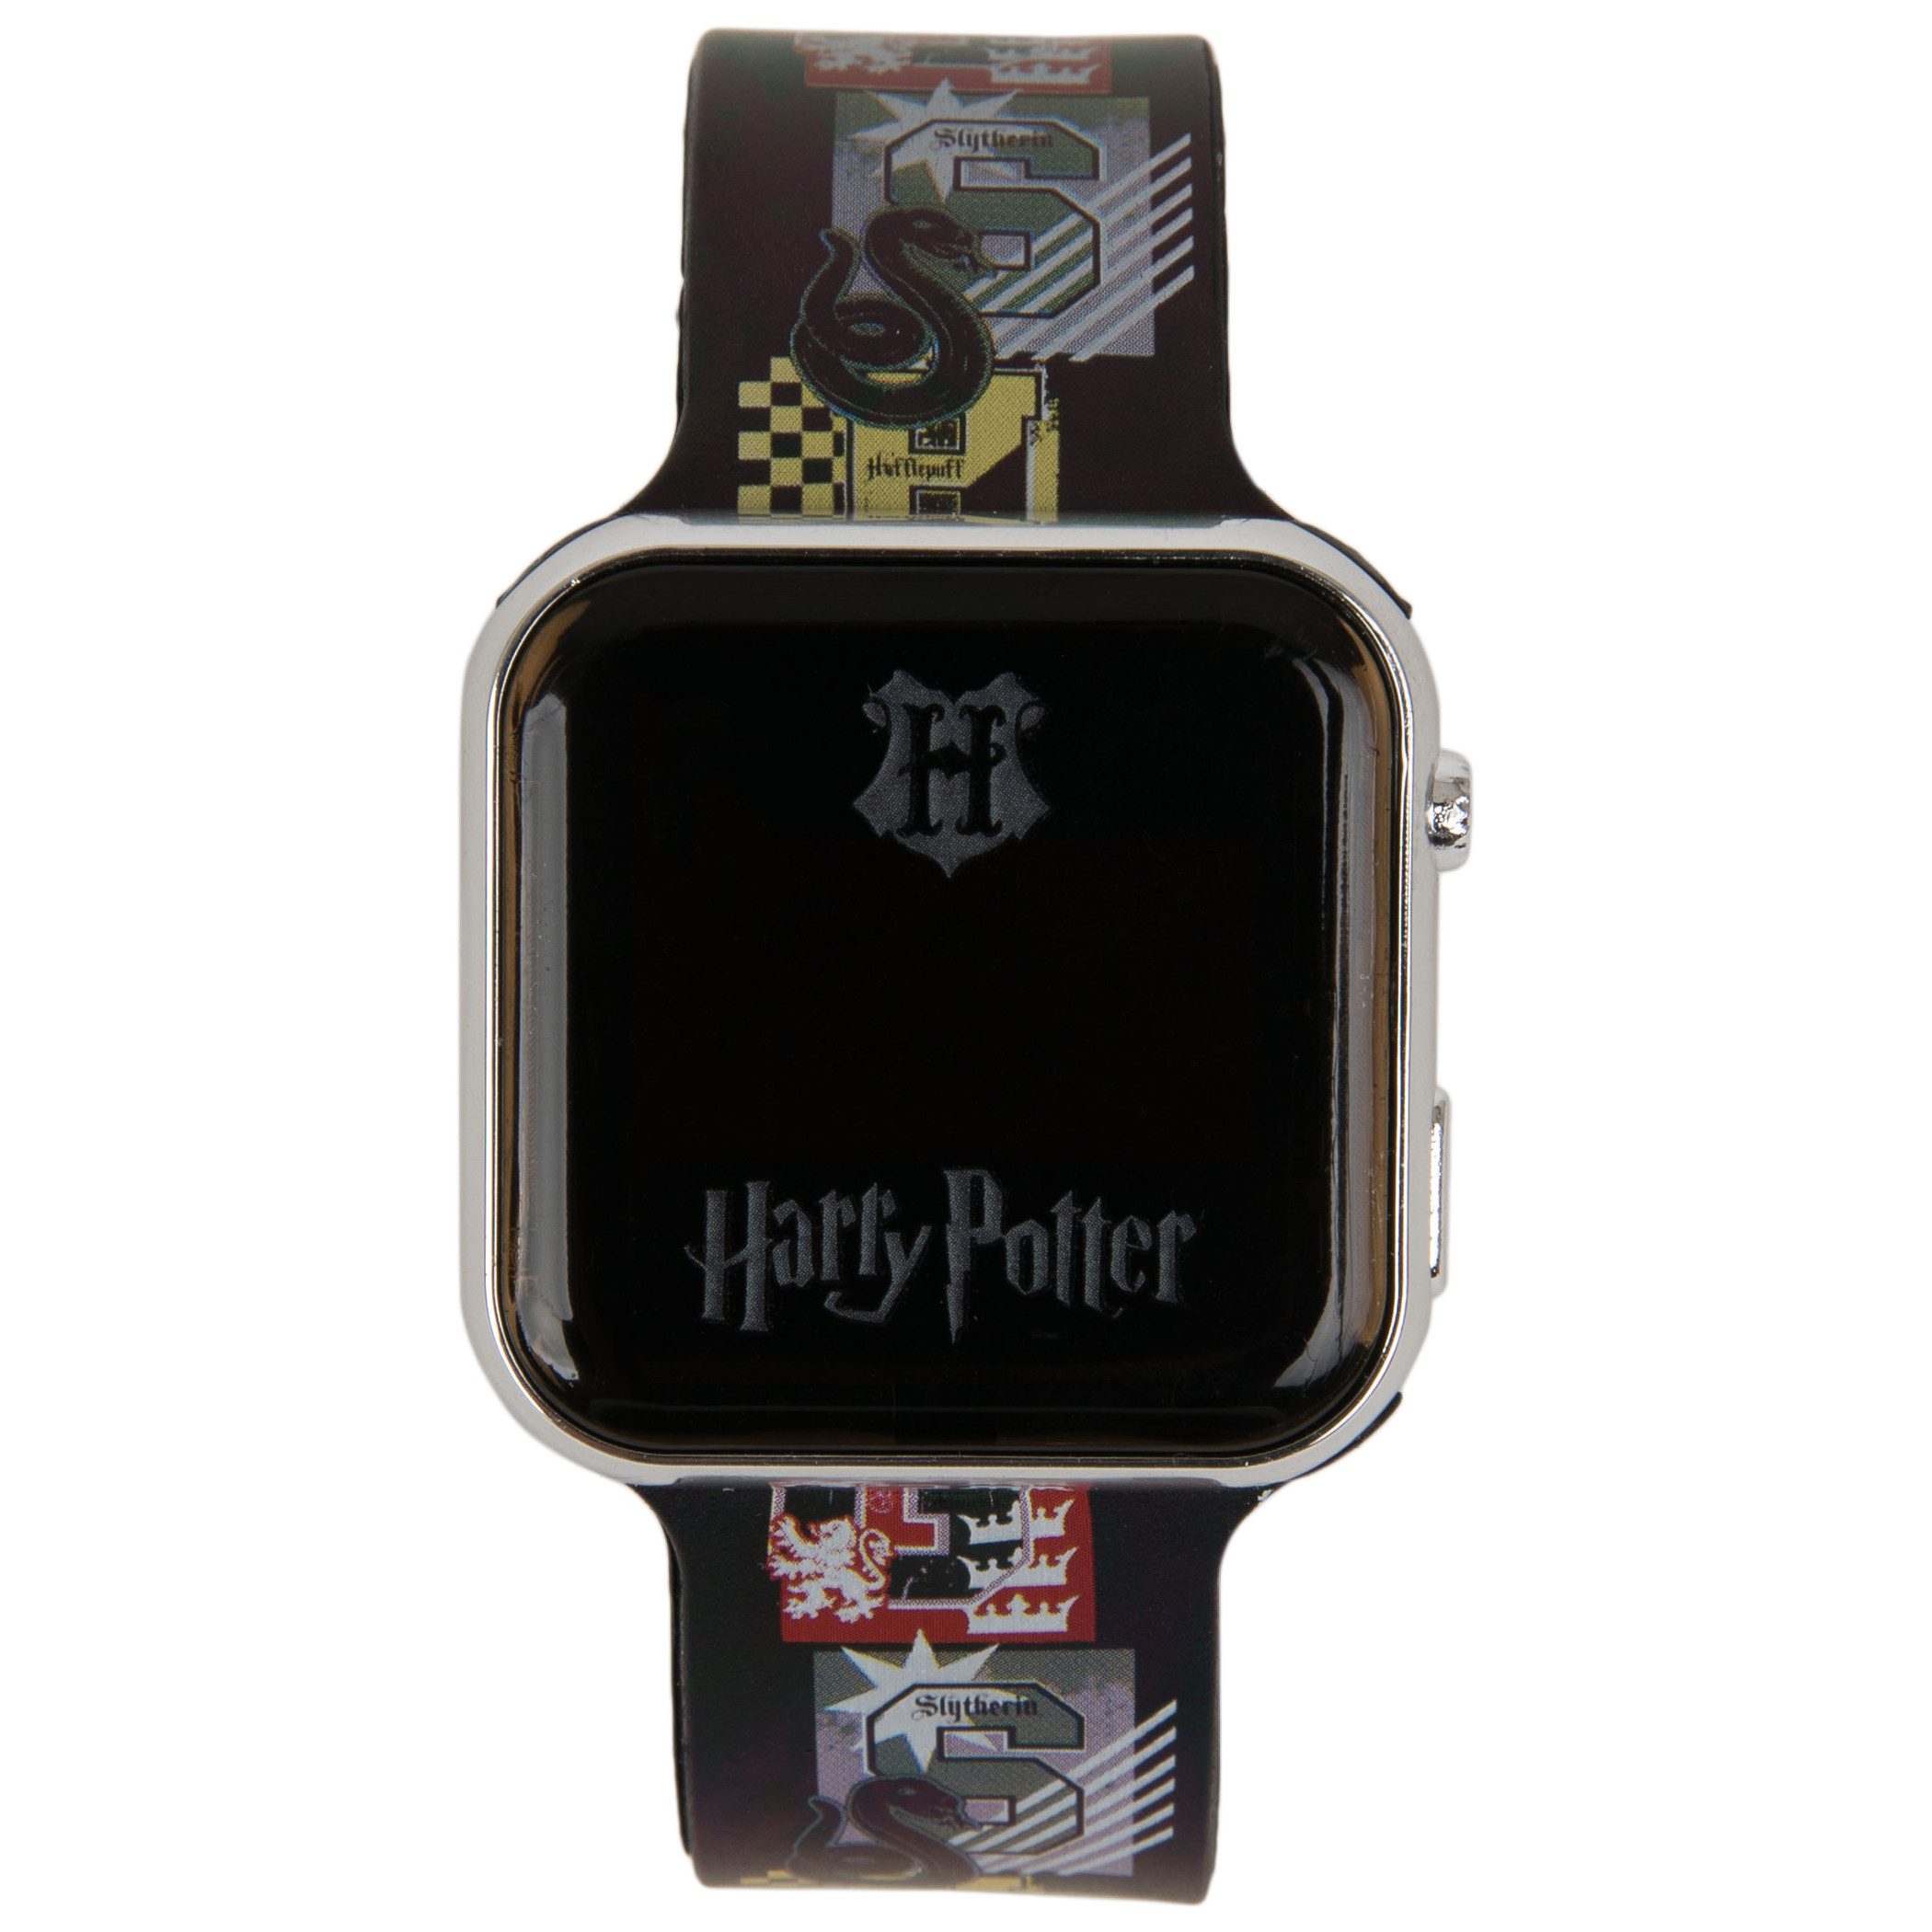 Harry Potter House Crests LED Wrist Watch